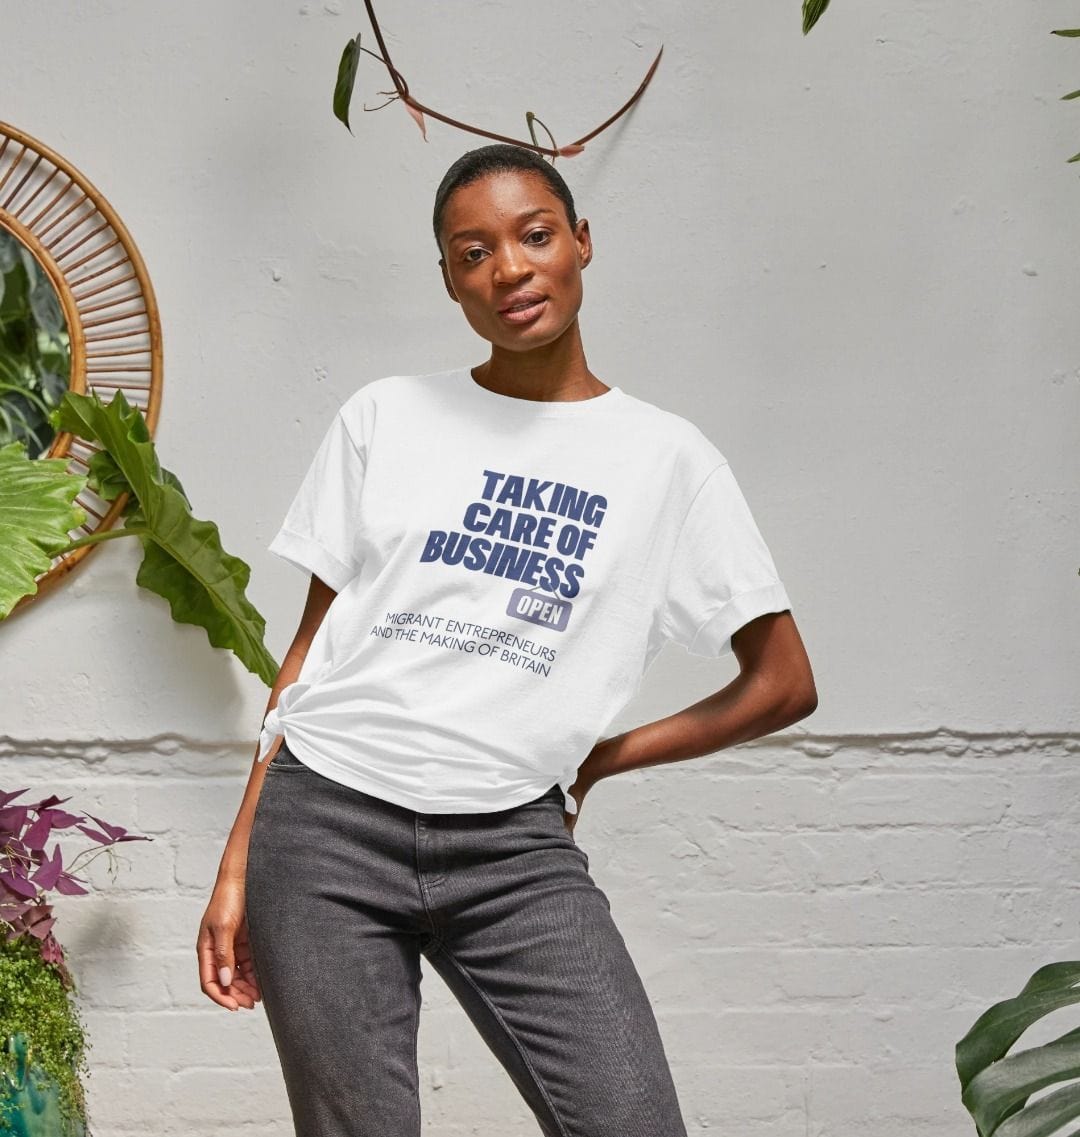 Taking Care of Business - Women's Relaxed Fit T-Shirt - Migration Museum Shop